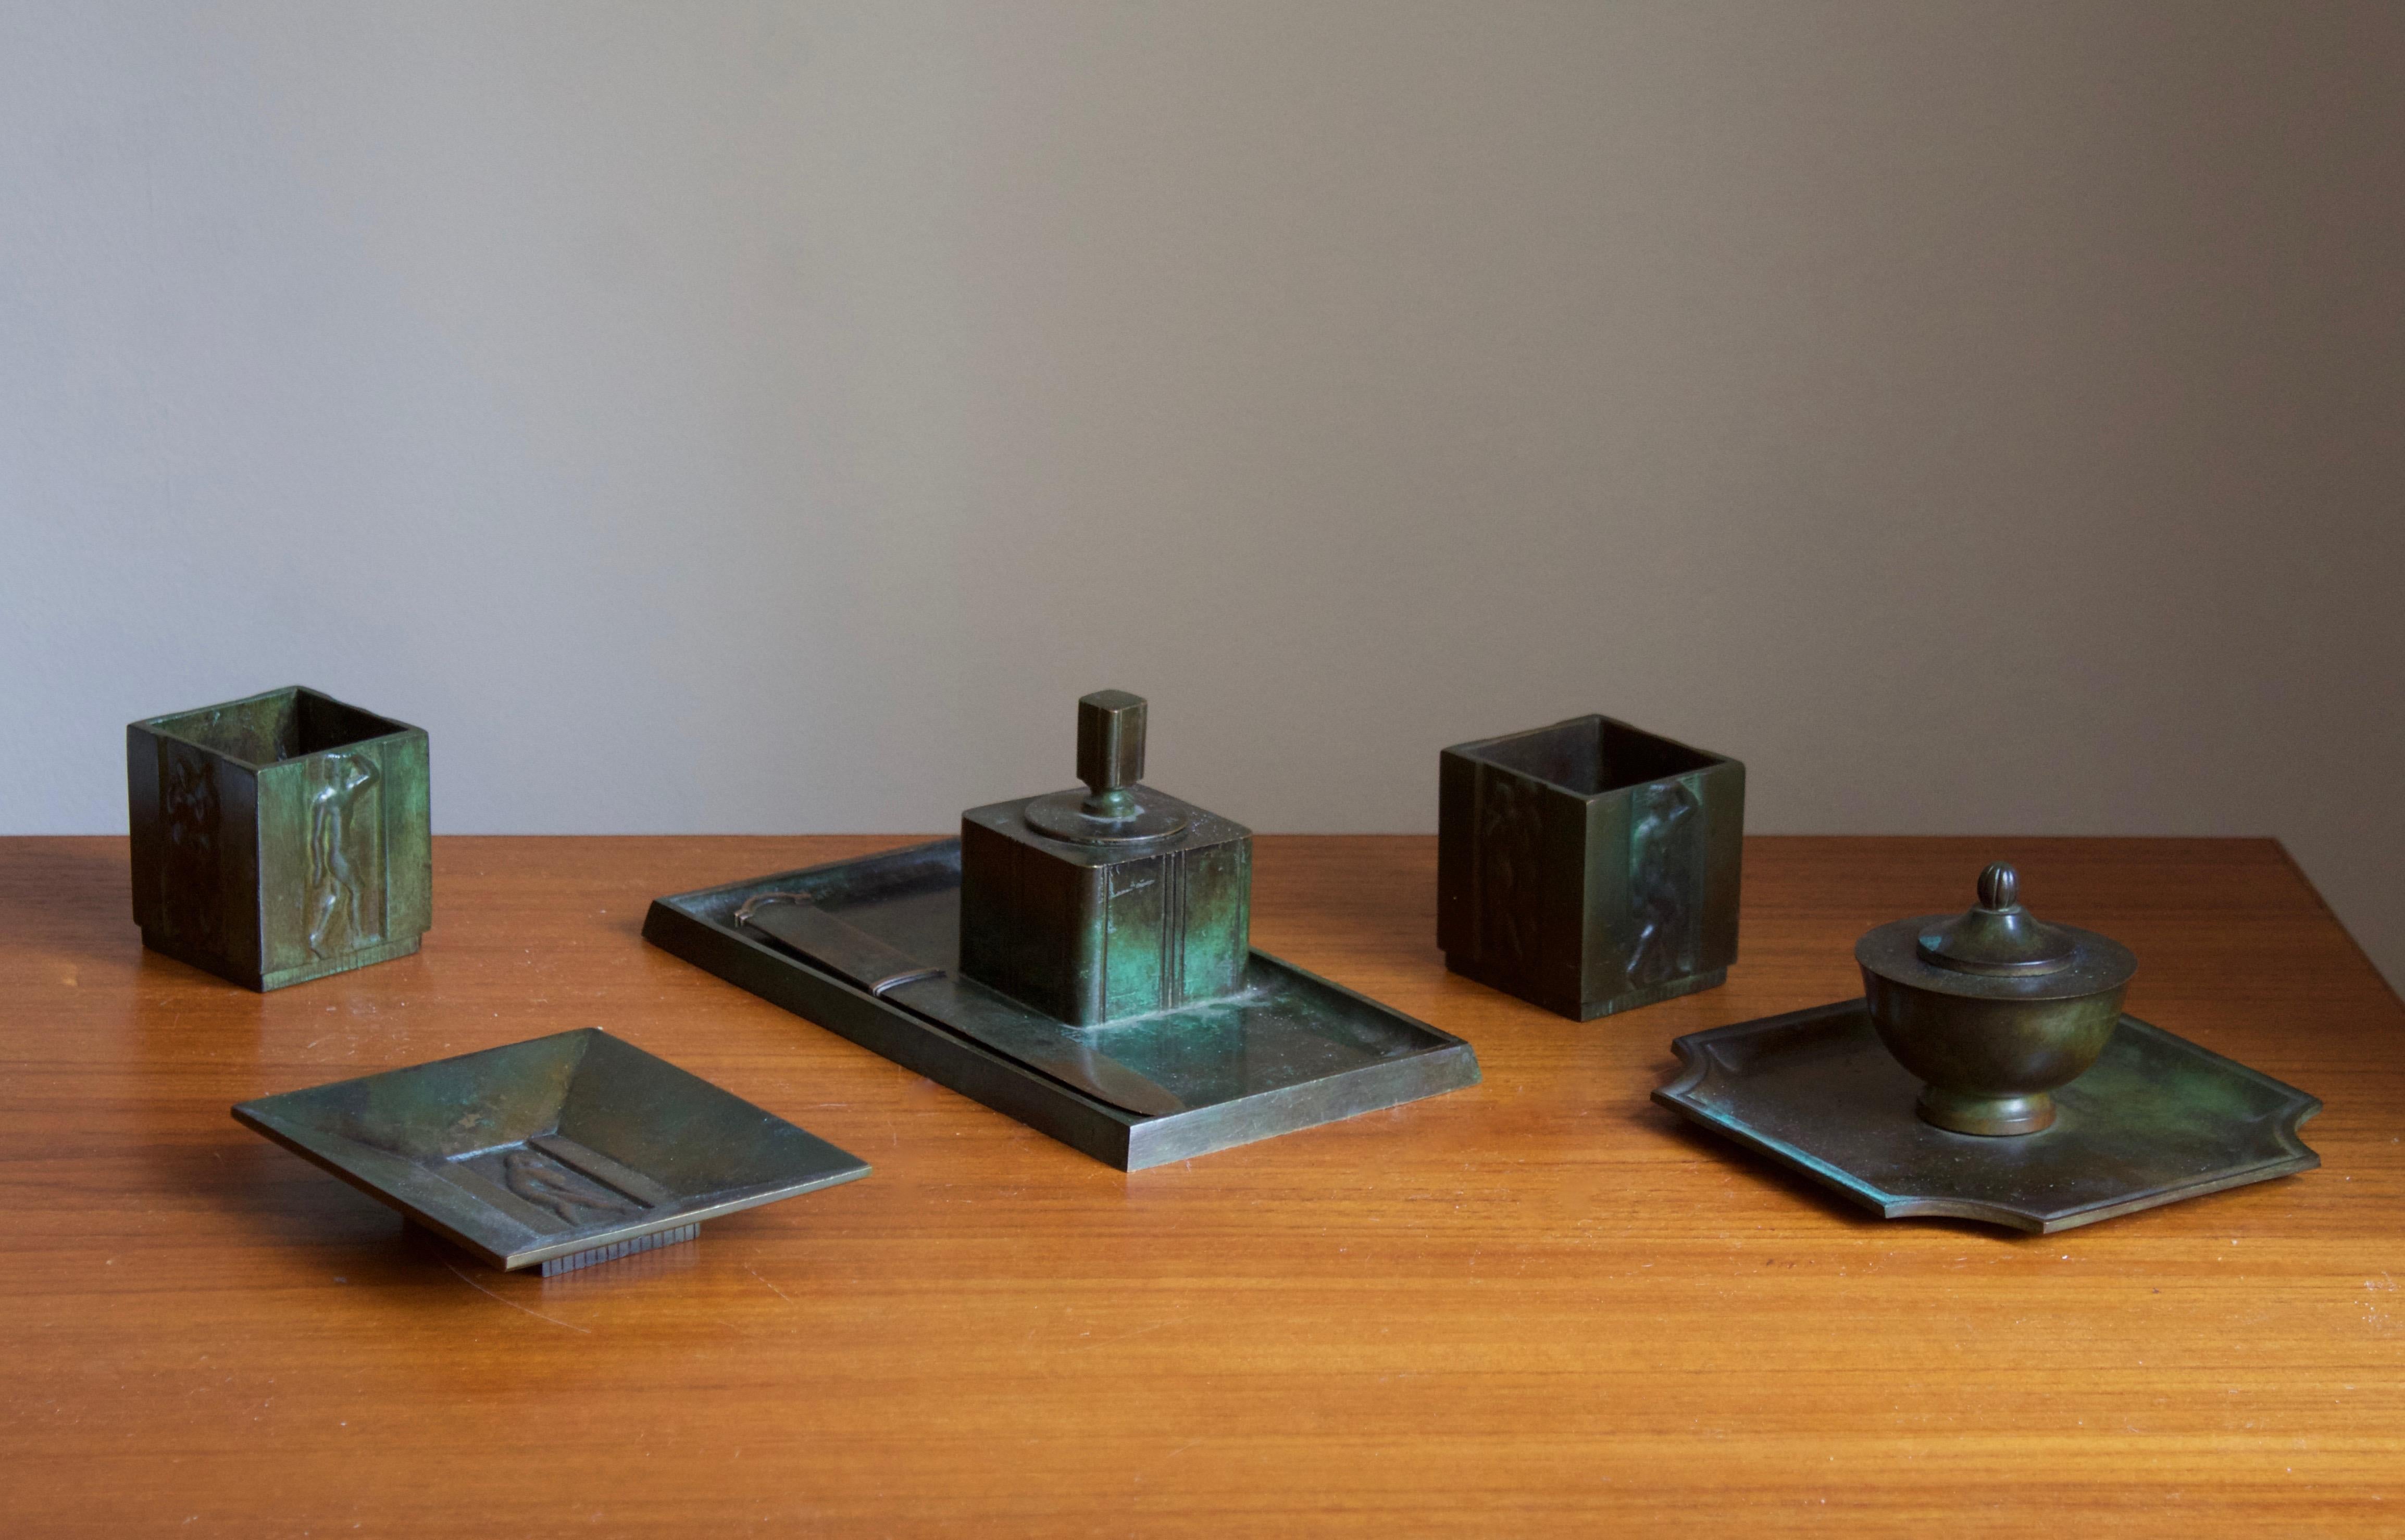 A set of desk accessories / desk set, including trays, inkwells, containers and a letter knife, designed and produced by GAB, stamped with makers marks, Sweden, 1930s. In cast bronze.

Stated dimensions are of the tray with built-in inkwell in the